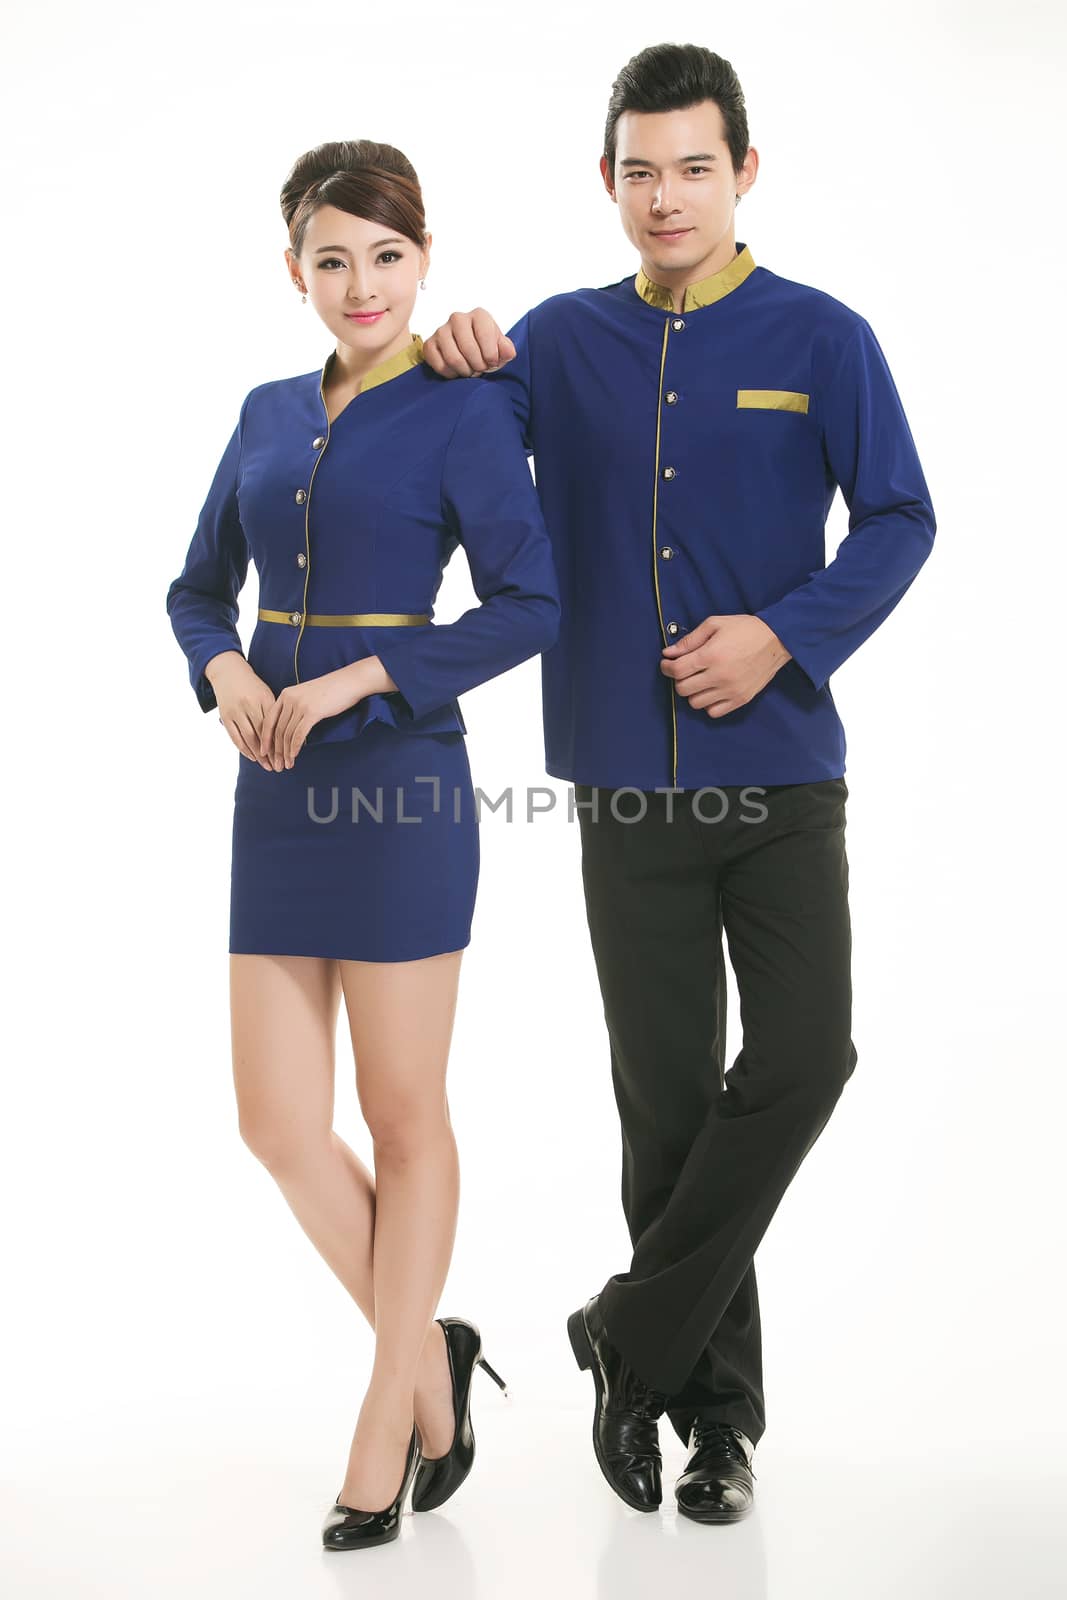 Wear clothing occupation Chinese waiters in white background